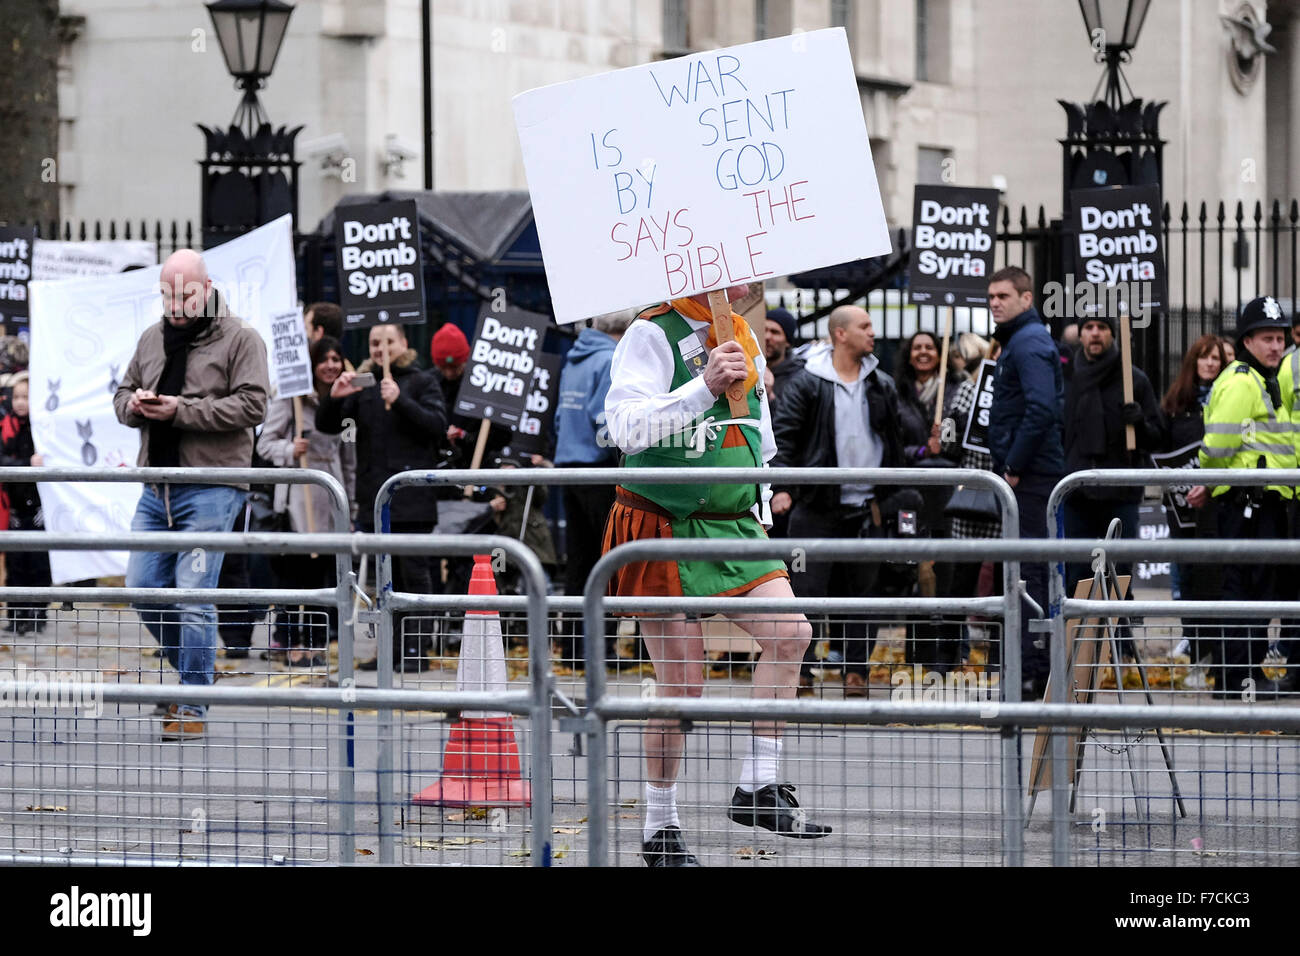 Neil Cornelius Horan a Christian fundamentalist dances a jig as demonstrators gather in London to protest against bombing Syria. Stock Photo